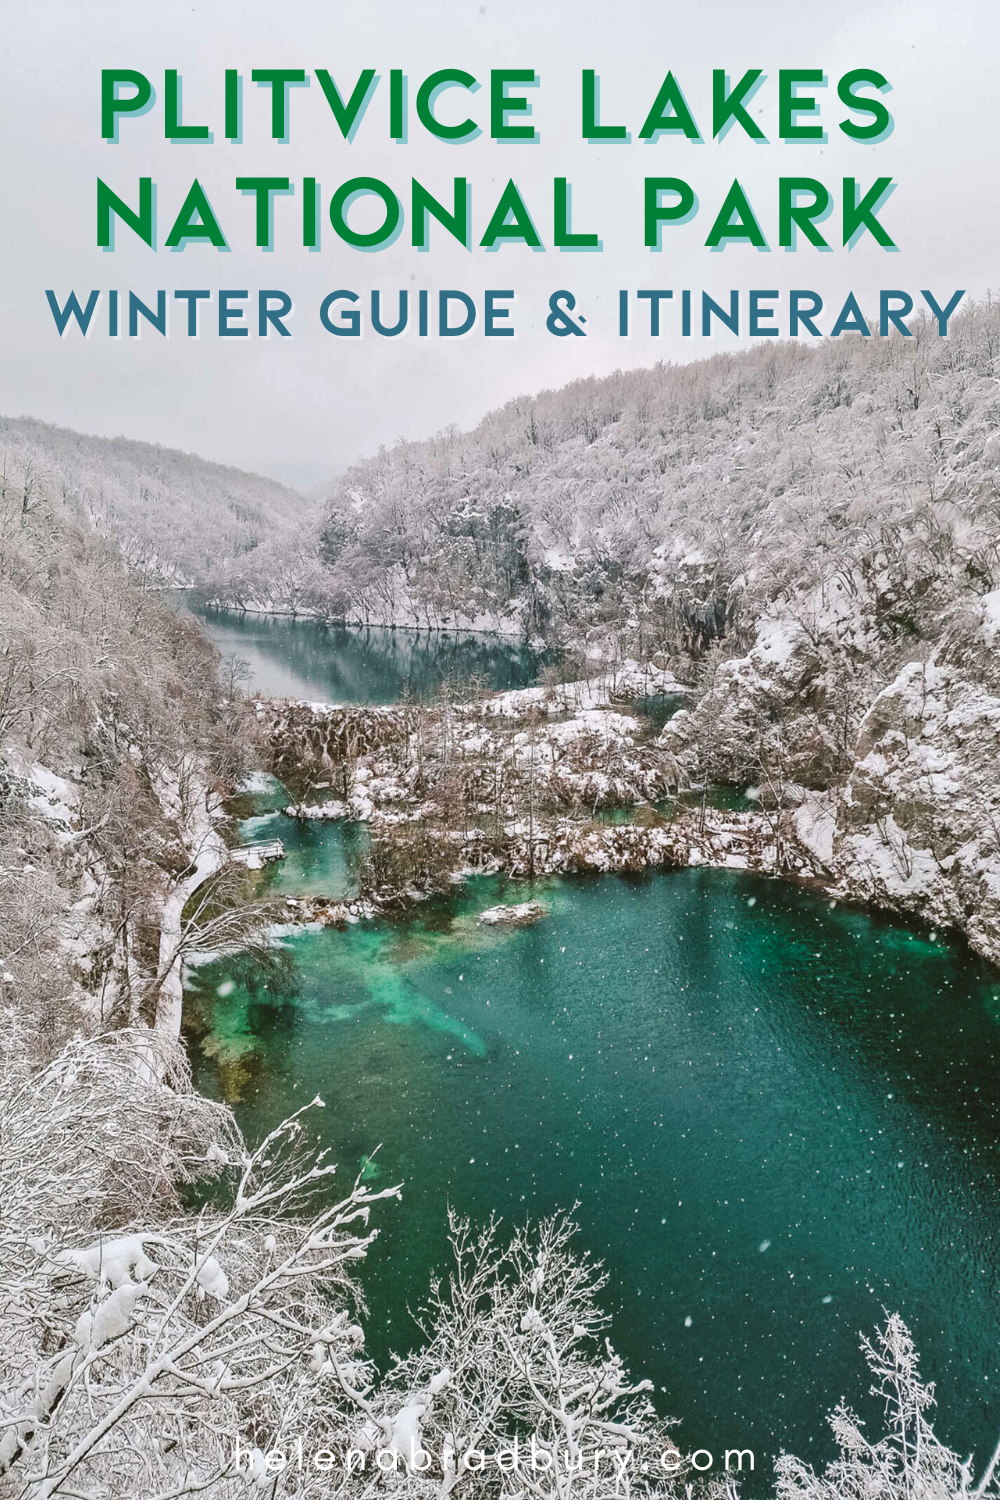 Most people don’t consider visiting Plitvice National Park in winter, but here’s why you should! Plan a snowy getaway with this Plitvice Lakes winter guide. Snow hikes, deer feeding and mythical villages - Croatia isn’t just a summer destination | pl